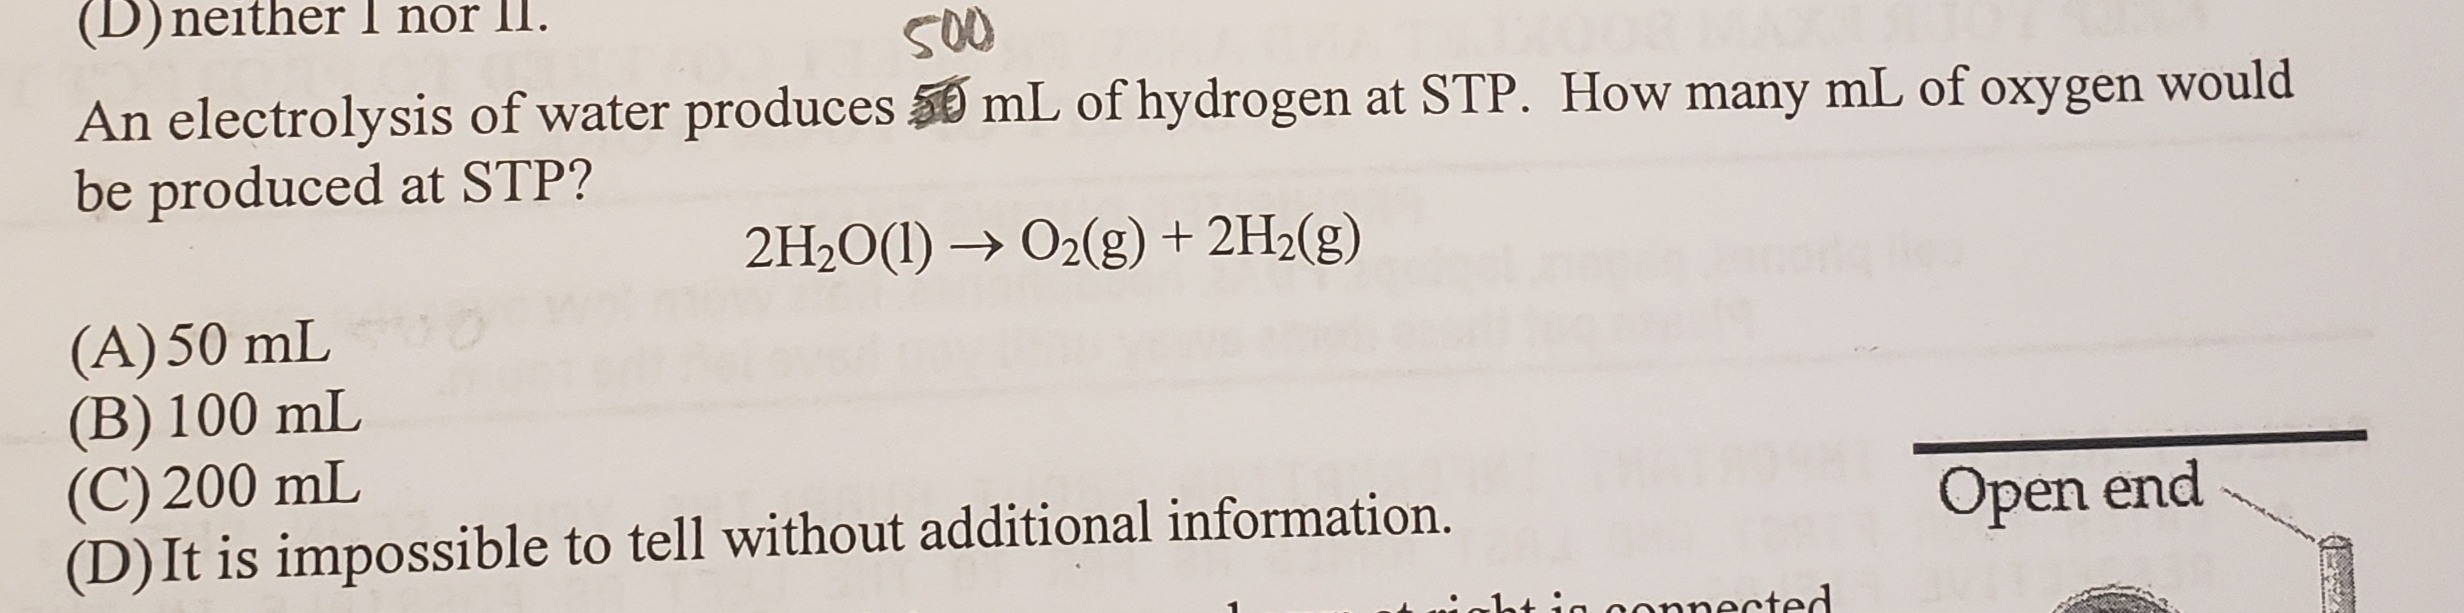 (D)neither I nor II.
S00
mL of hydrogen at STP. How many mL of oxygen would
An electrolysis of water produces
be produced at STP?
O2(g) + 2H2(g)
2H20(I)
(A)50 mL
(B) 100 mL
(C) 200 mL
(D) It is impossible to tell without additional information.
Open end
1ti connected
